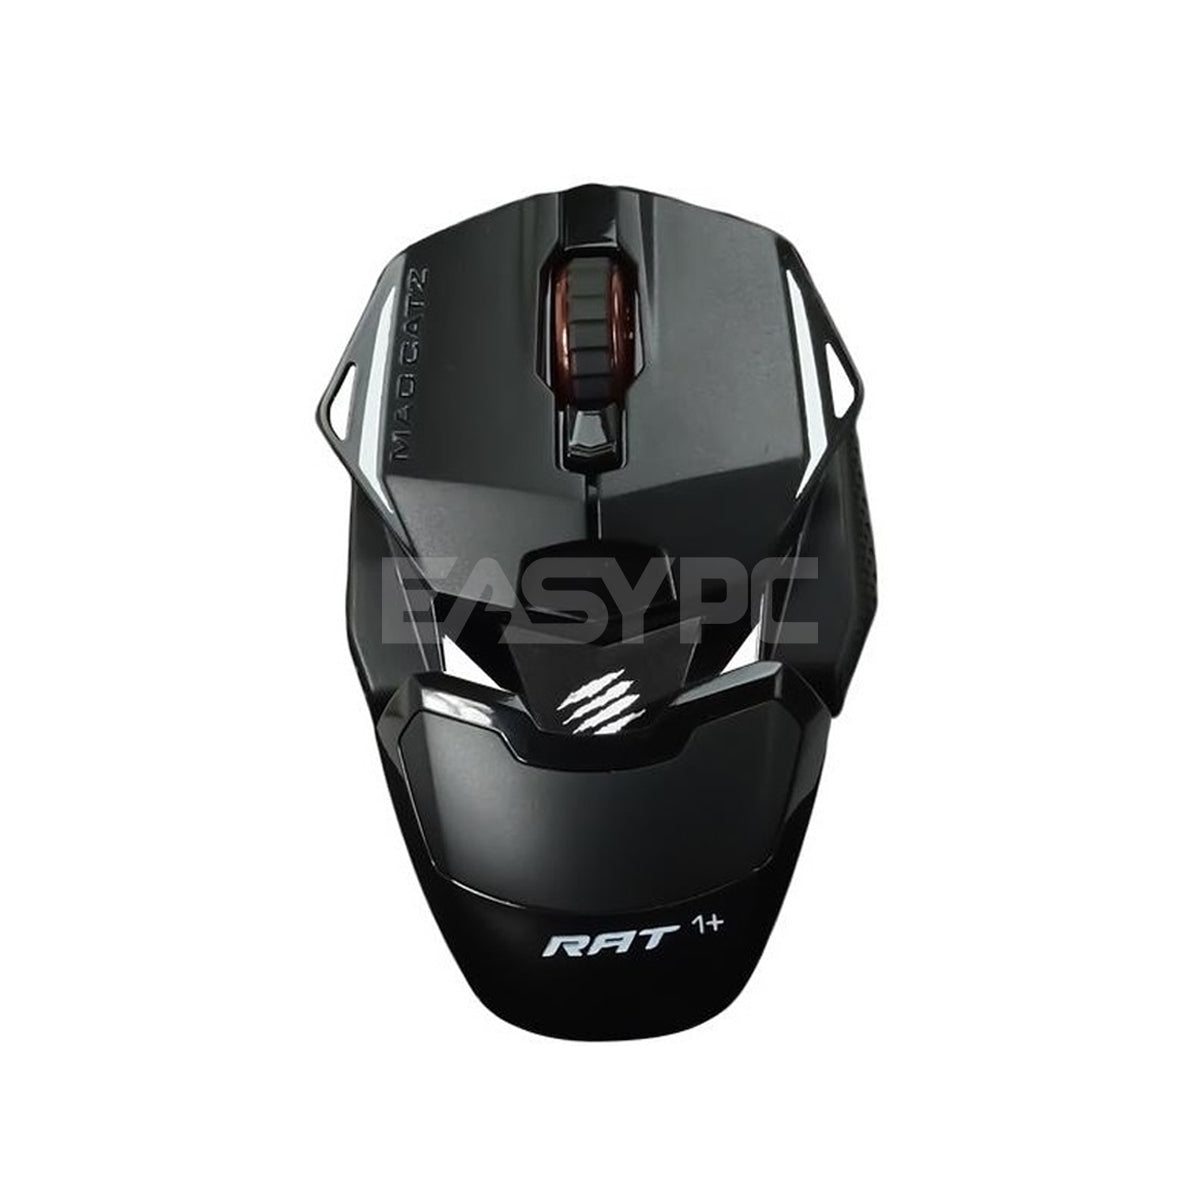 Madcatz R.A.T. 1+ Optical Gaming Mouse MAR.500 1ION